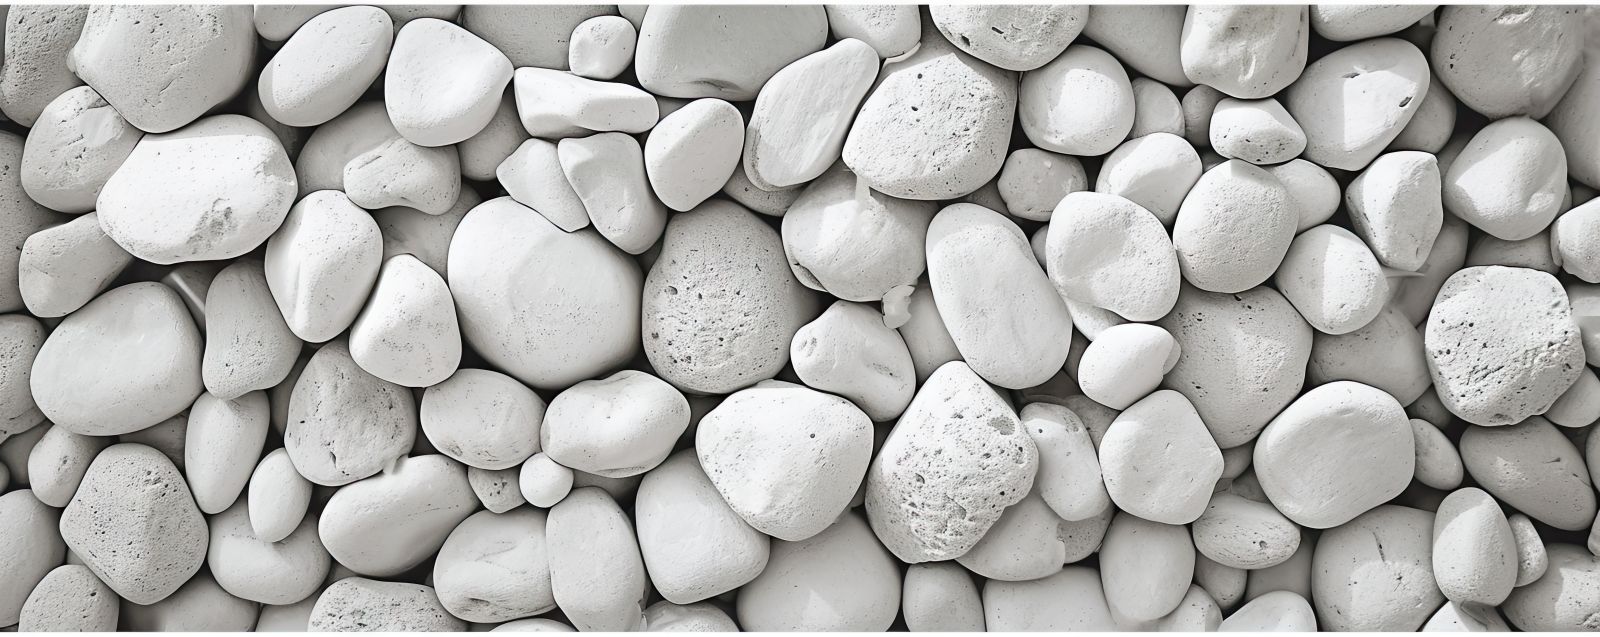 10 Innovative Ways to Use Gravel in Your Home Landscaping